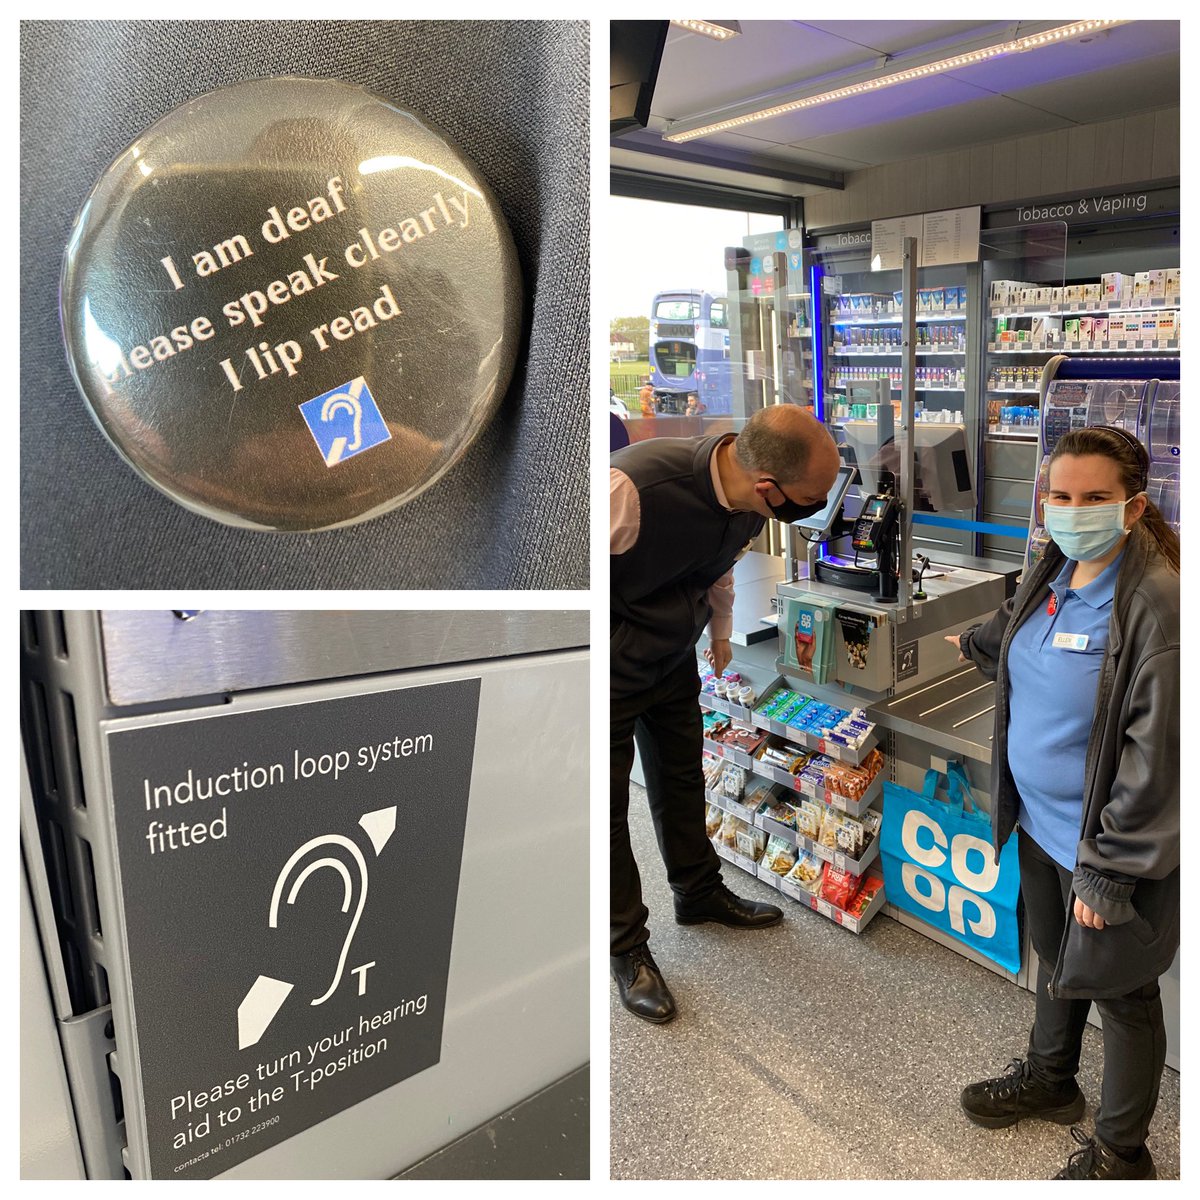 Proud to see Ellen show @PeterBatt3  the hearing loop and how it makes her work environment better in store this evening. It clearly works well as Ellen has sold 18 membership cards in 3 hours.😊. We are all really proud to work on an inclusive Division. #DeafAwarenessWeek2021